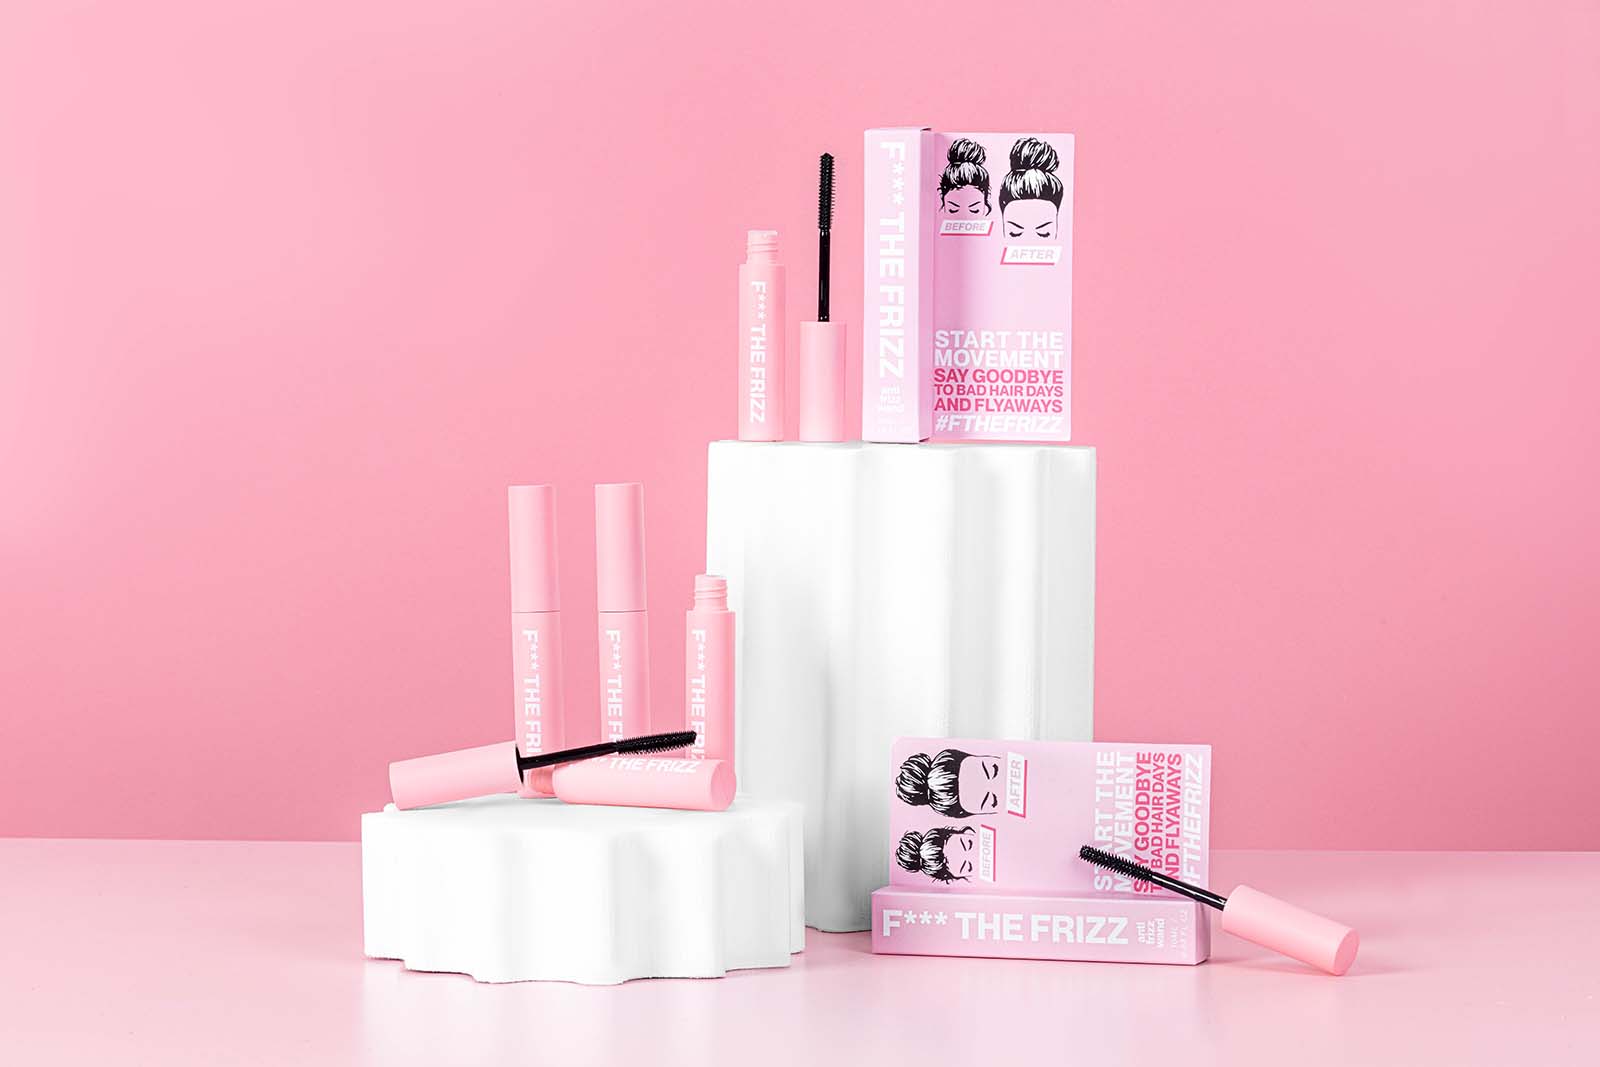 Creative Pink Product Photos for Anit Frizz Hair Wand. Styled content creation by Megzie Makes